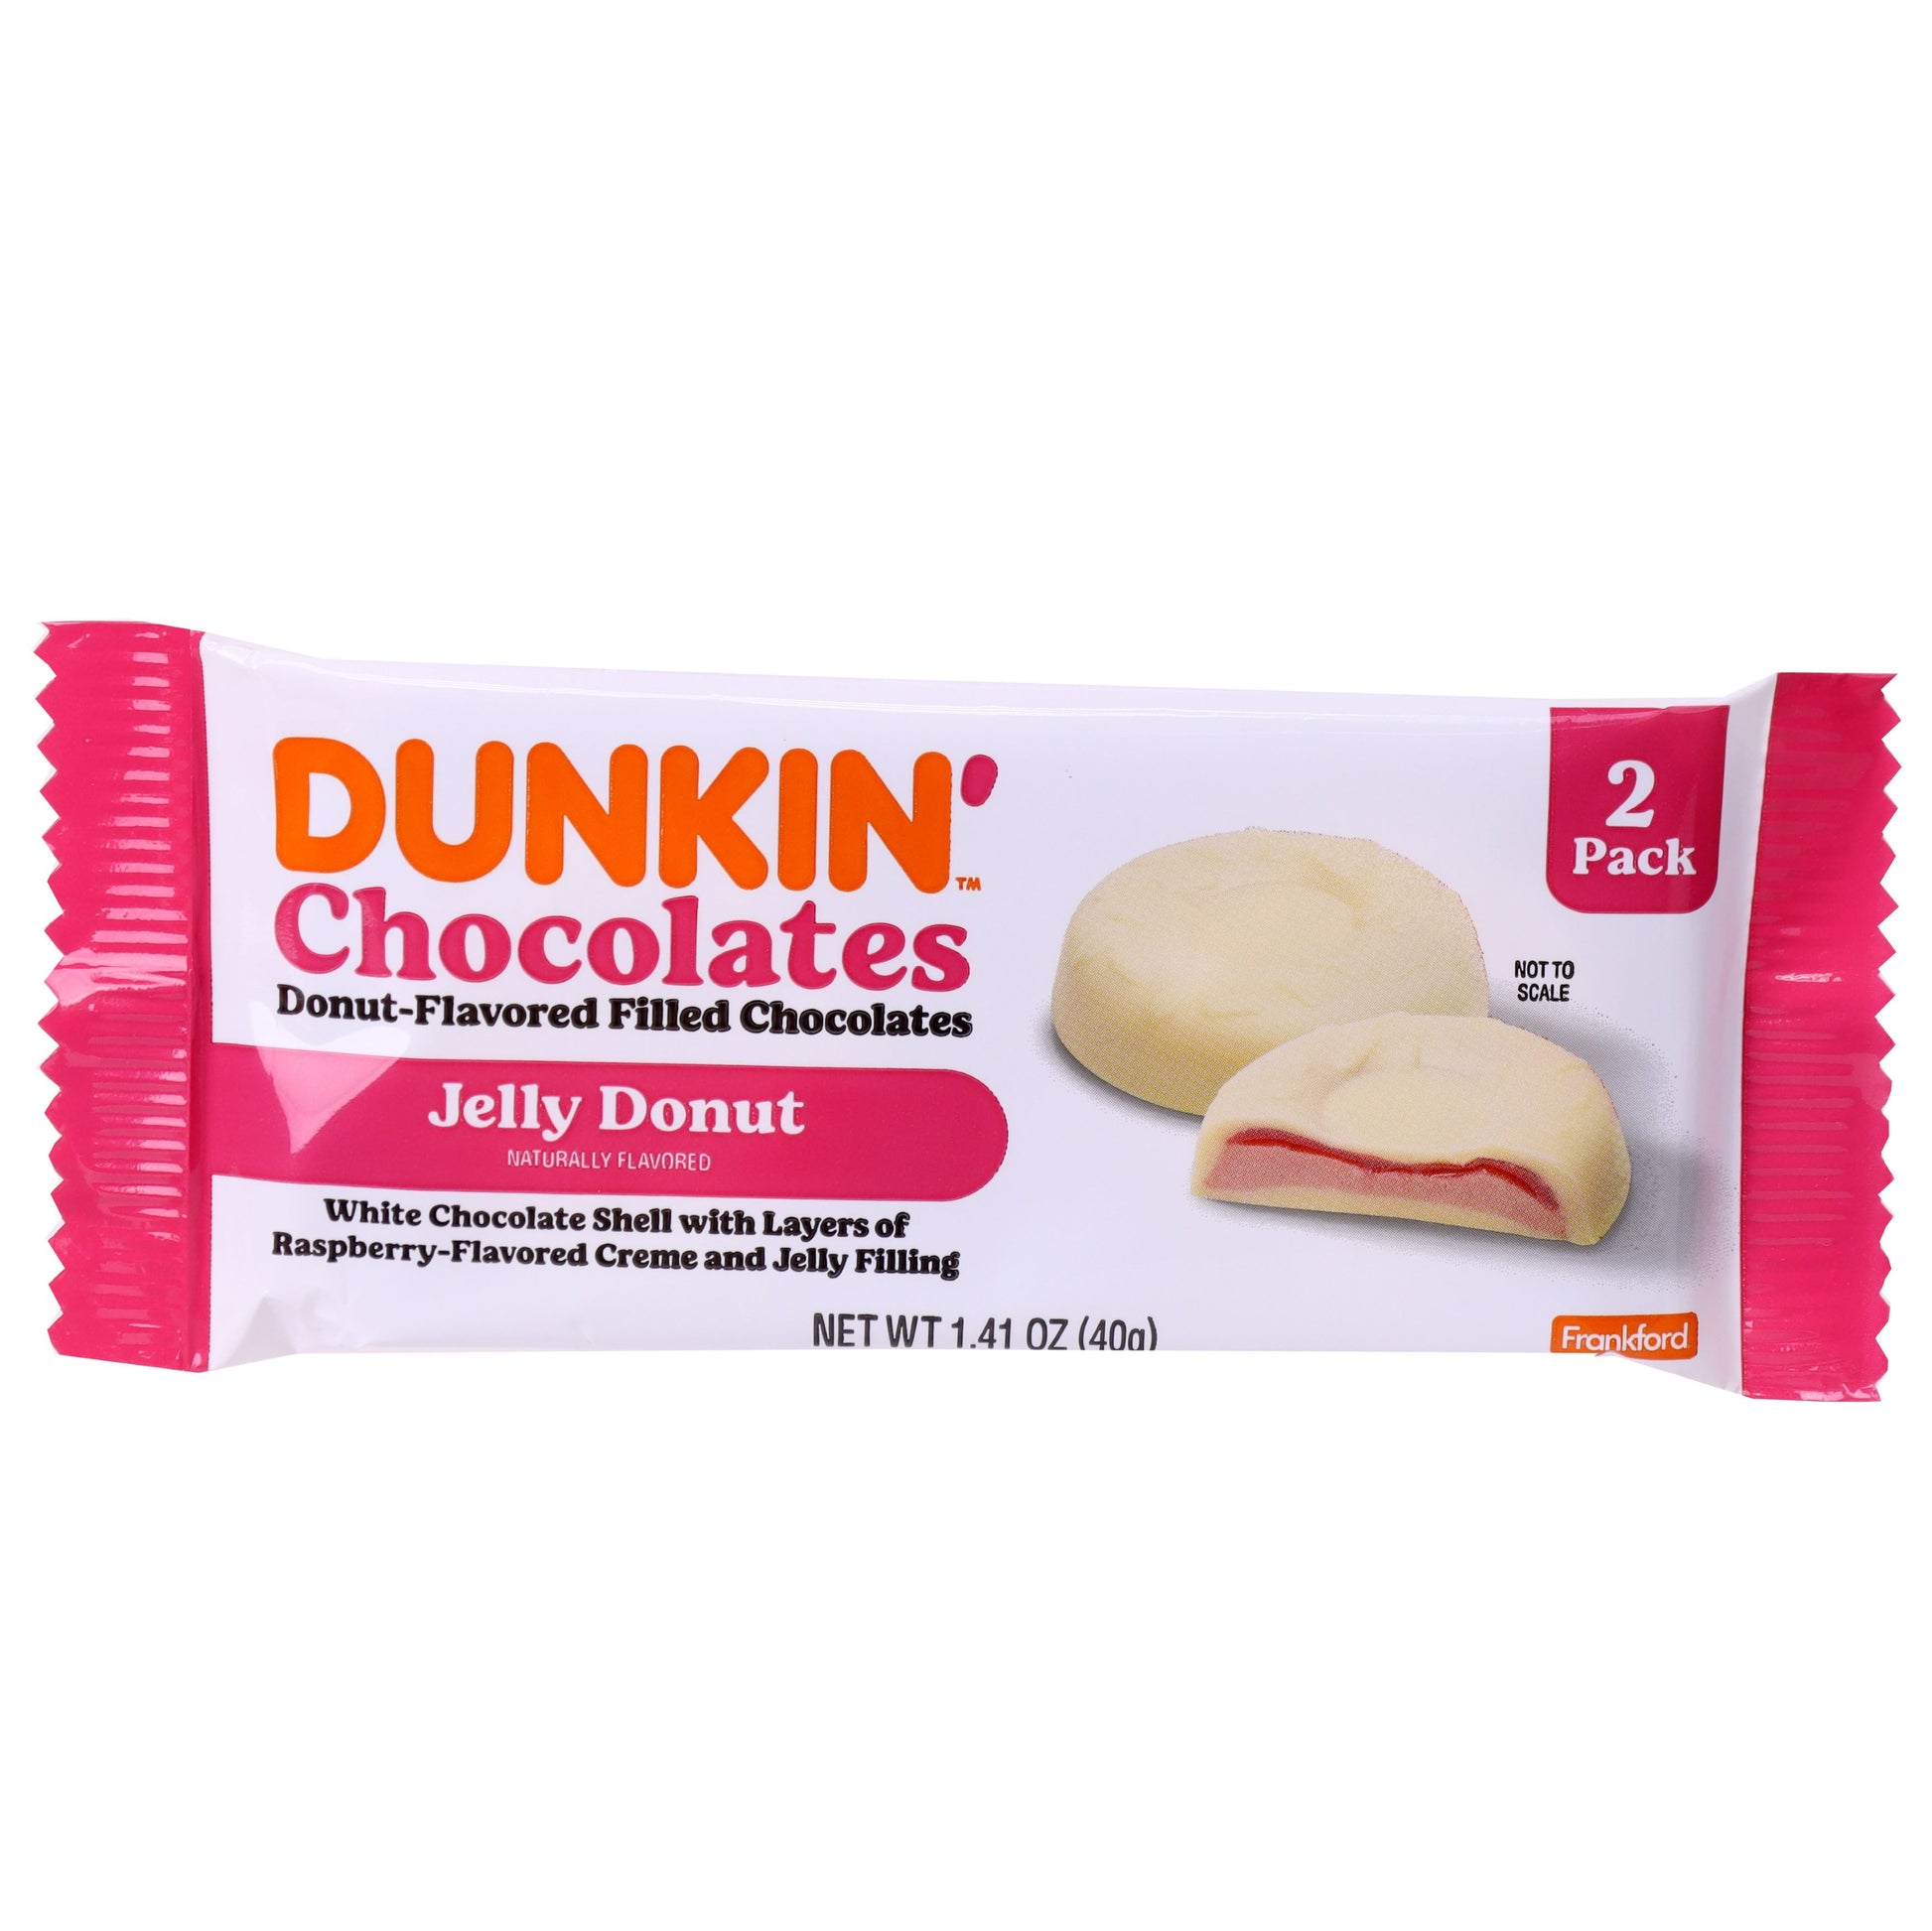 white and pink packaging shows 2 Pack of Dunkin' Jelly Donut Chocolates